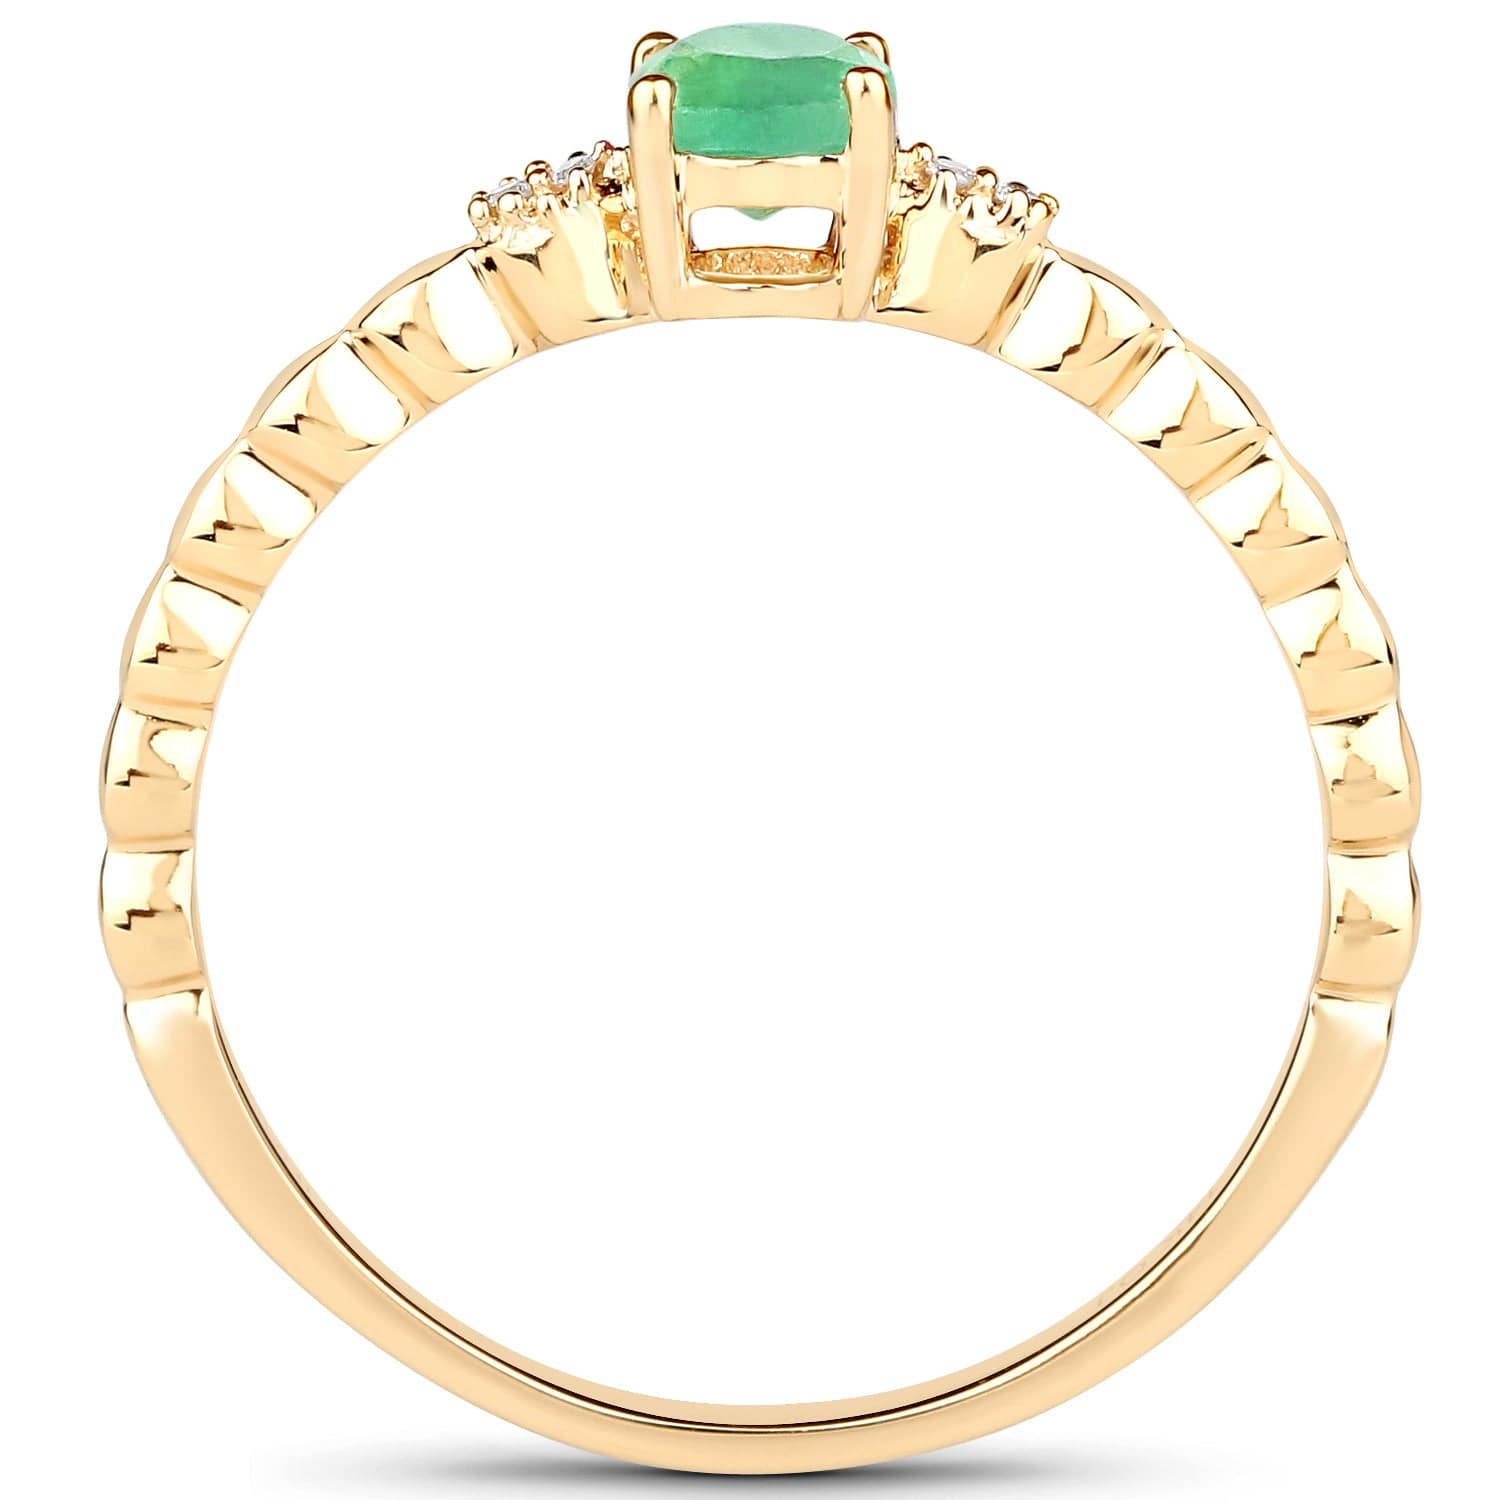 Dainty Emerald and Diamond Ring in 14K Yellow Gold, Genuine - The Pink Pigs, A Compassionate Boutique